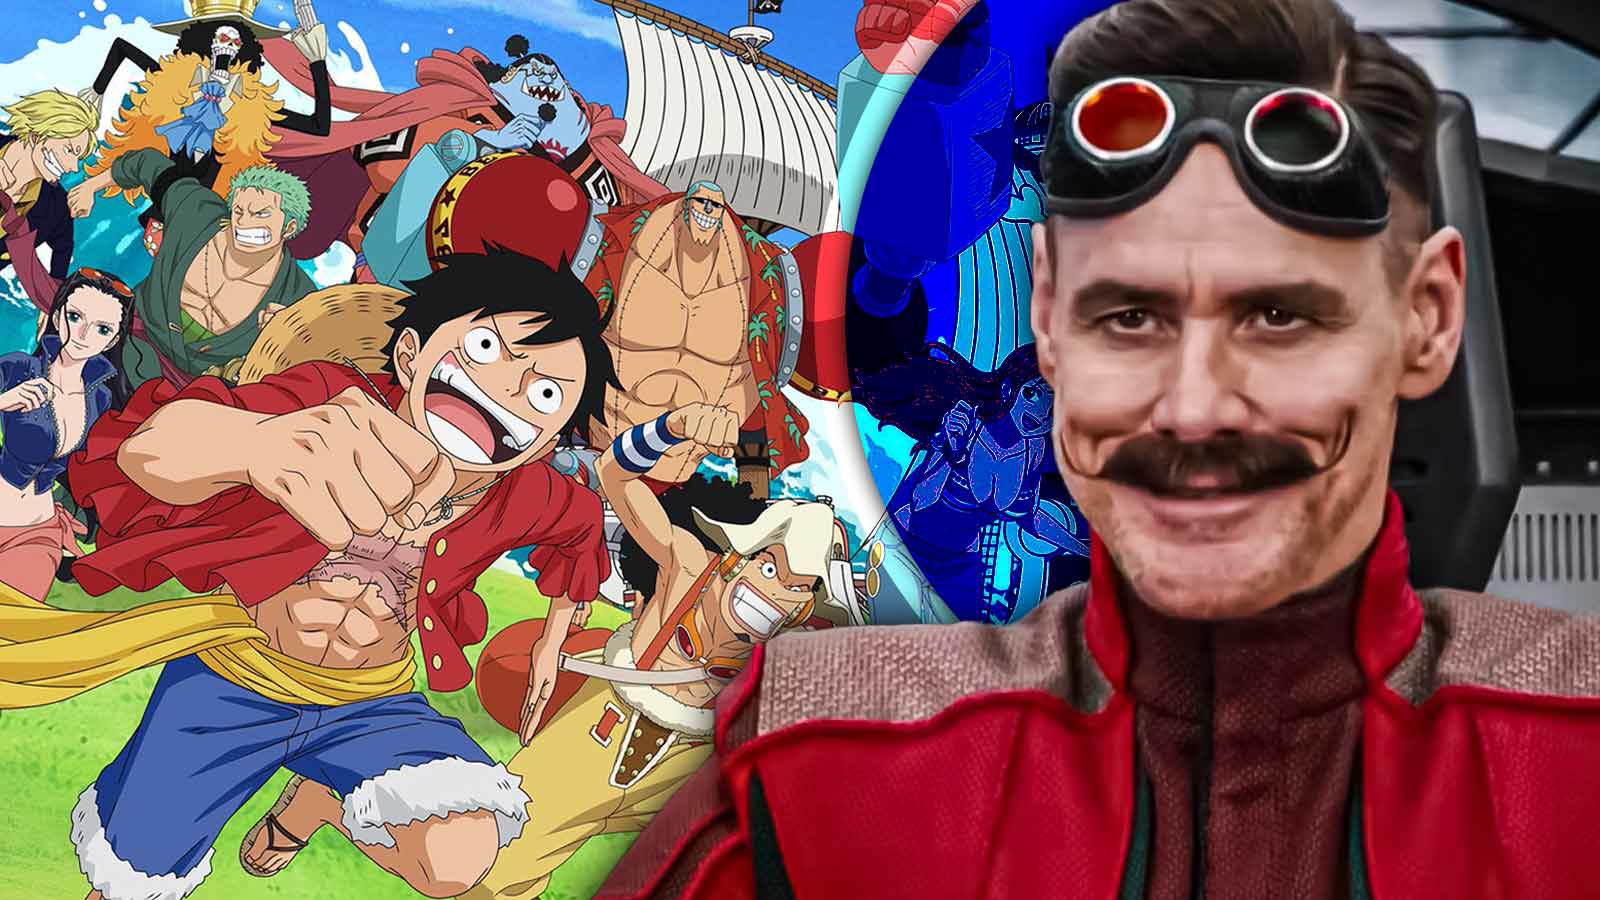 Eiichiro Oda May Have Based an Entire One Piece Island on Jim Carrey’s Iconic Character from Sonic the Hedgehog